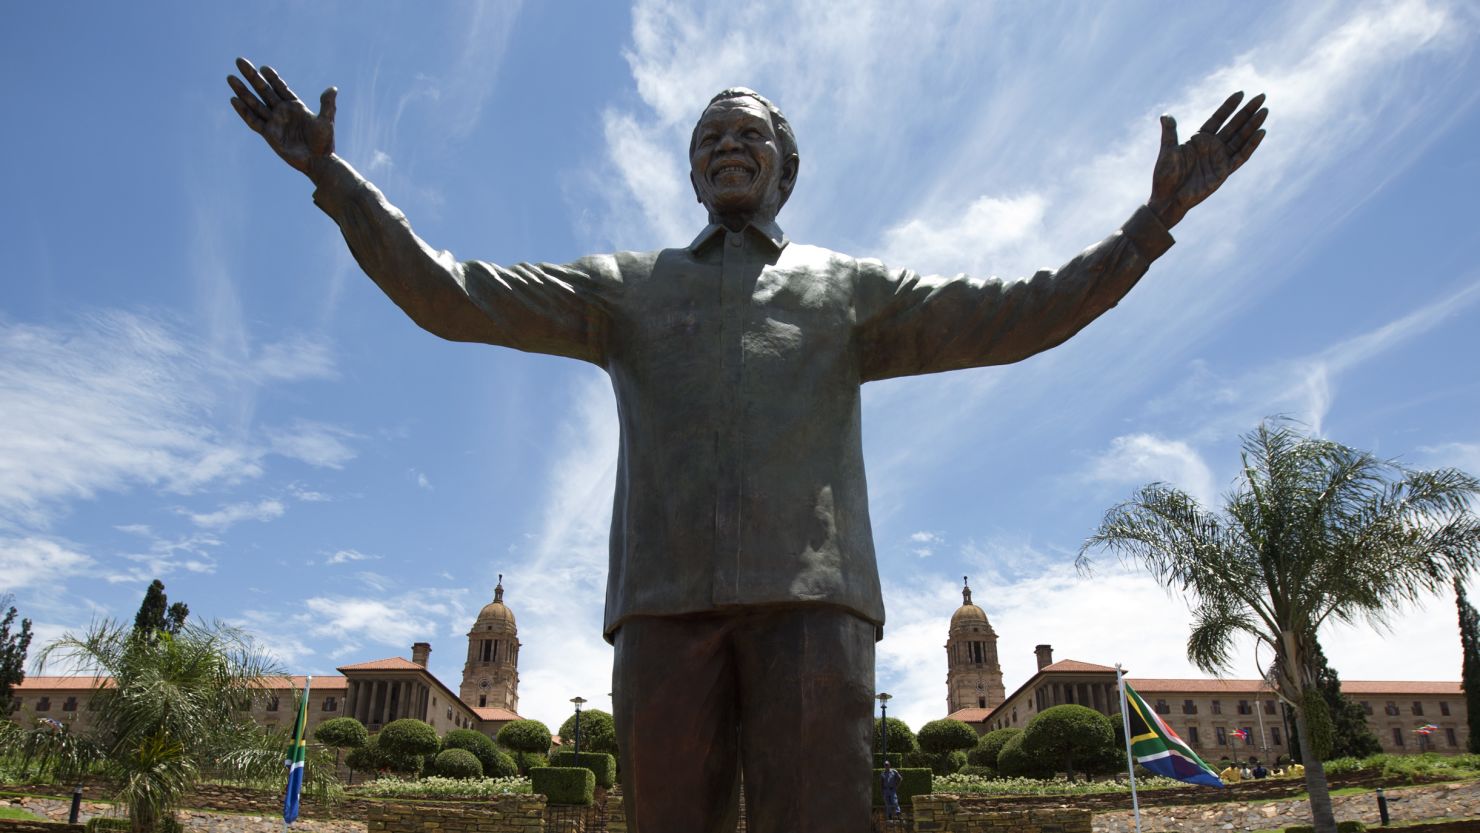  A statue of former South African president Nelson Mandela is unveiled at the Union Buildings in Pretoria on December 16, 2013.